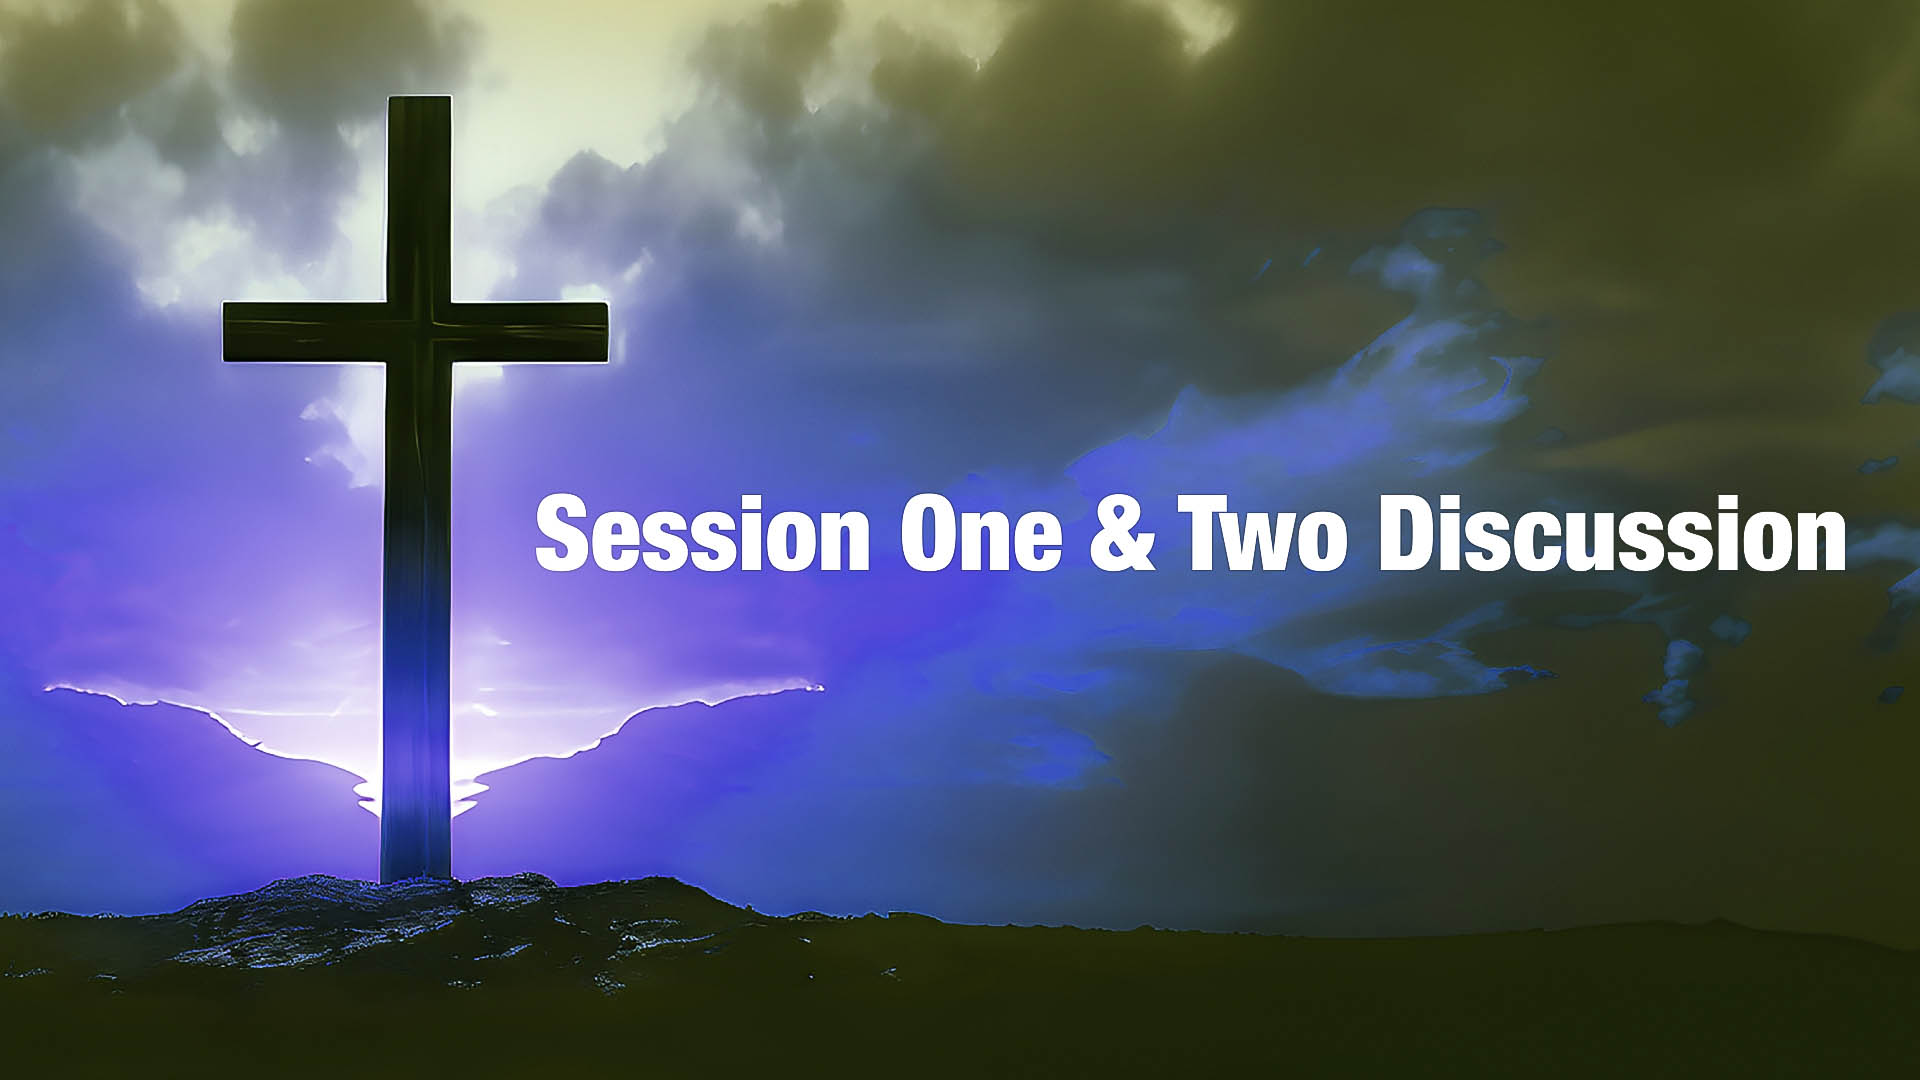 Dunkard Brethren Church| Leadership Conference | Session One & Two Discussion